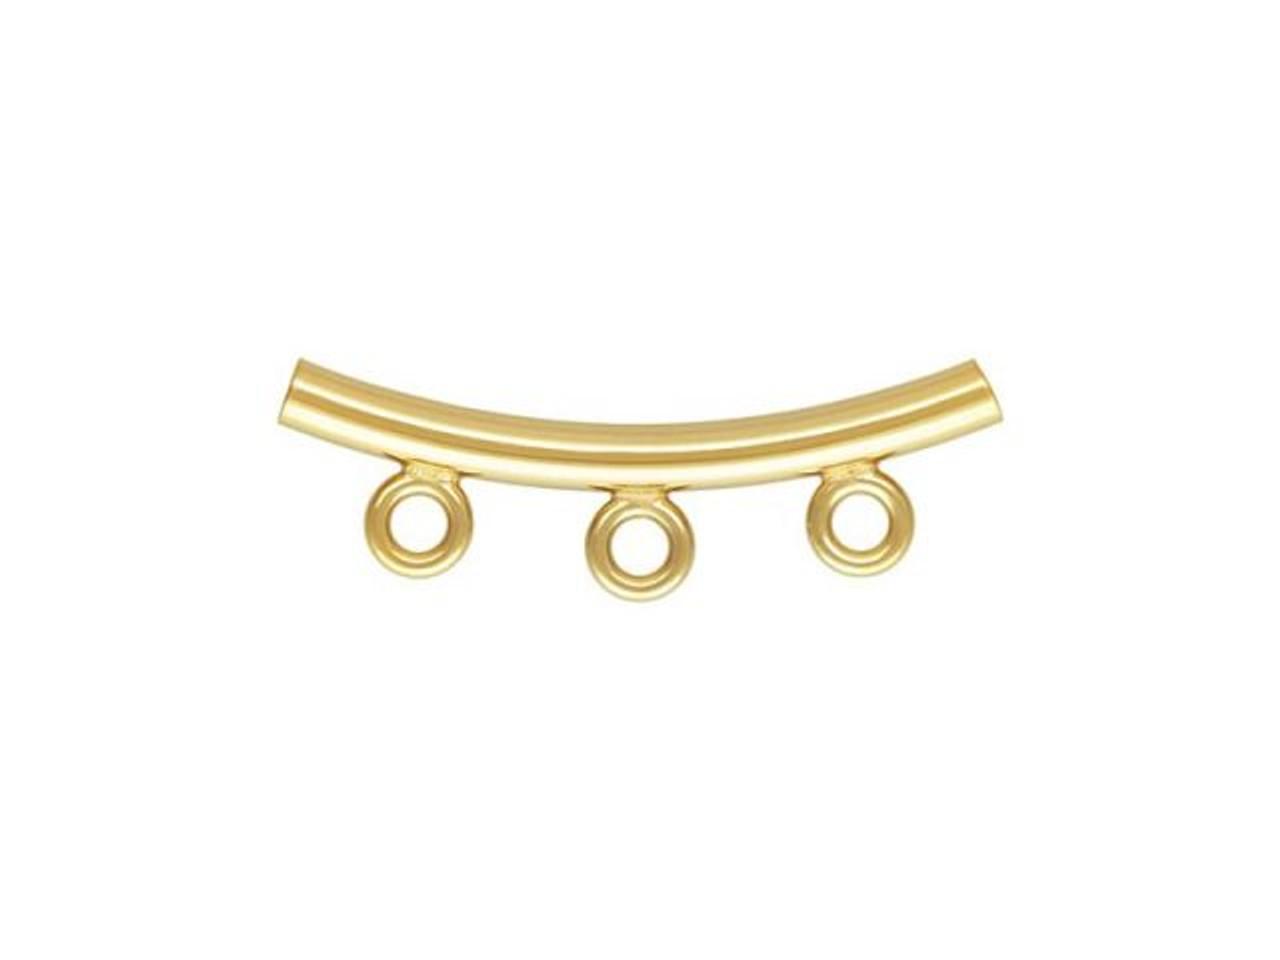 Gold Filled Round Bezel Earring post settings 4mm with loop